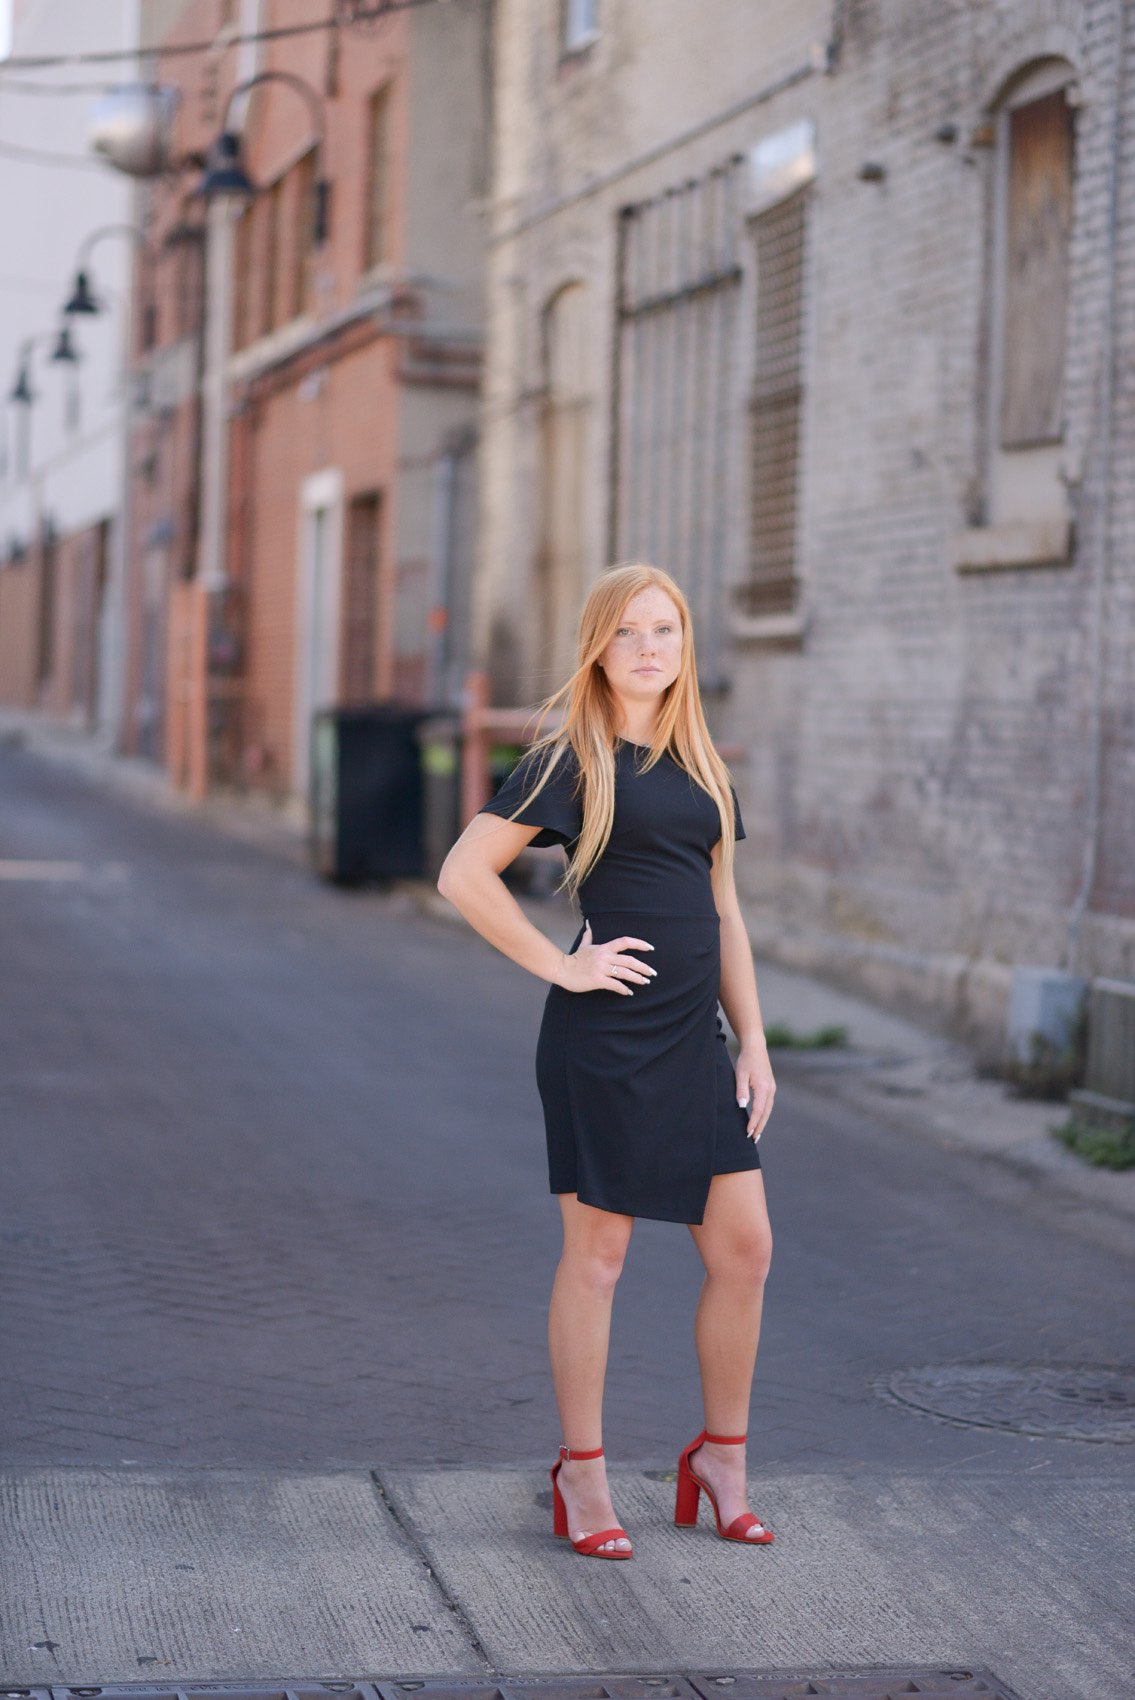 Senior girl in black dress standing on the sidewalk in front of the Holland Building in Springfield, Missouri.